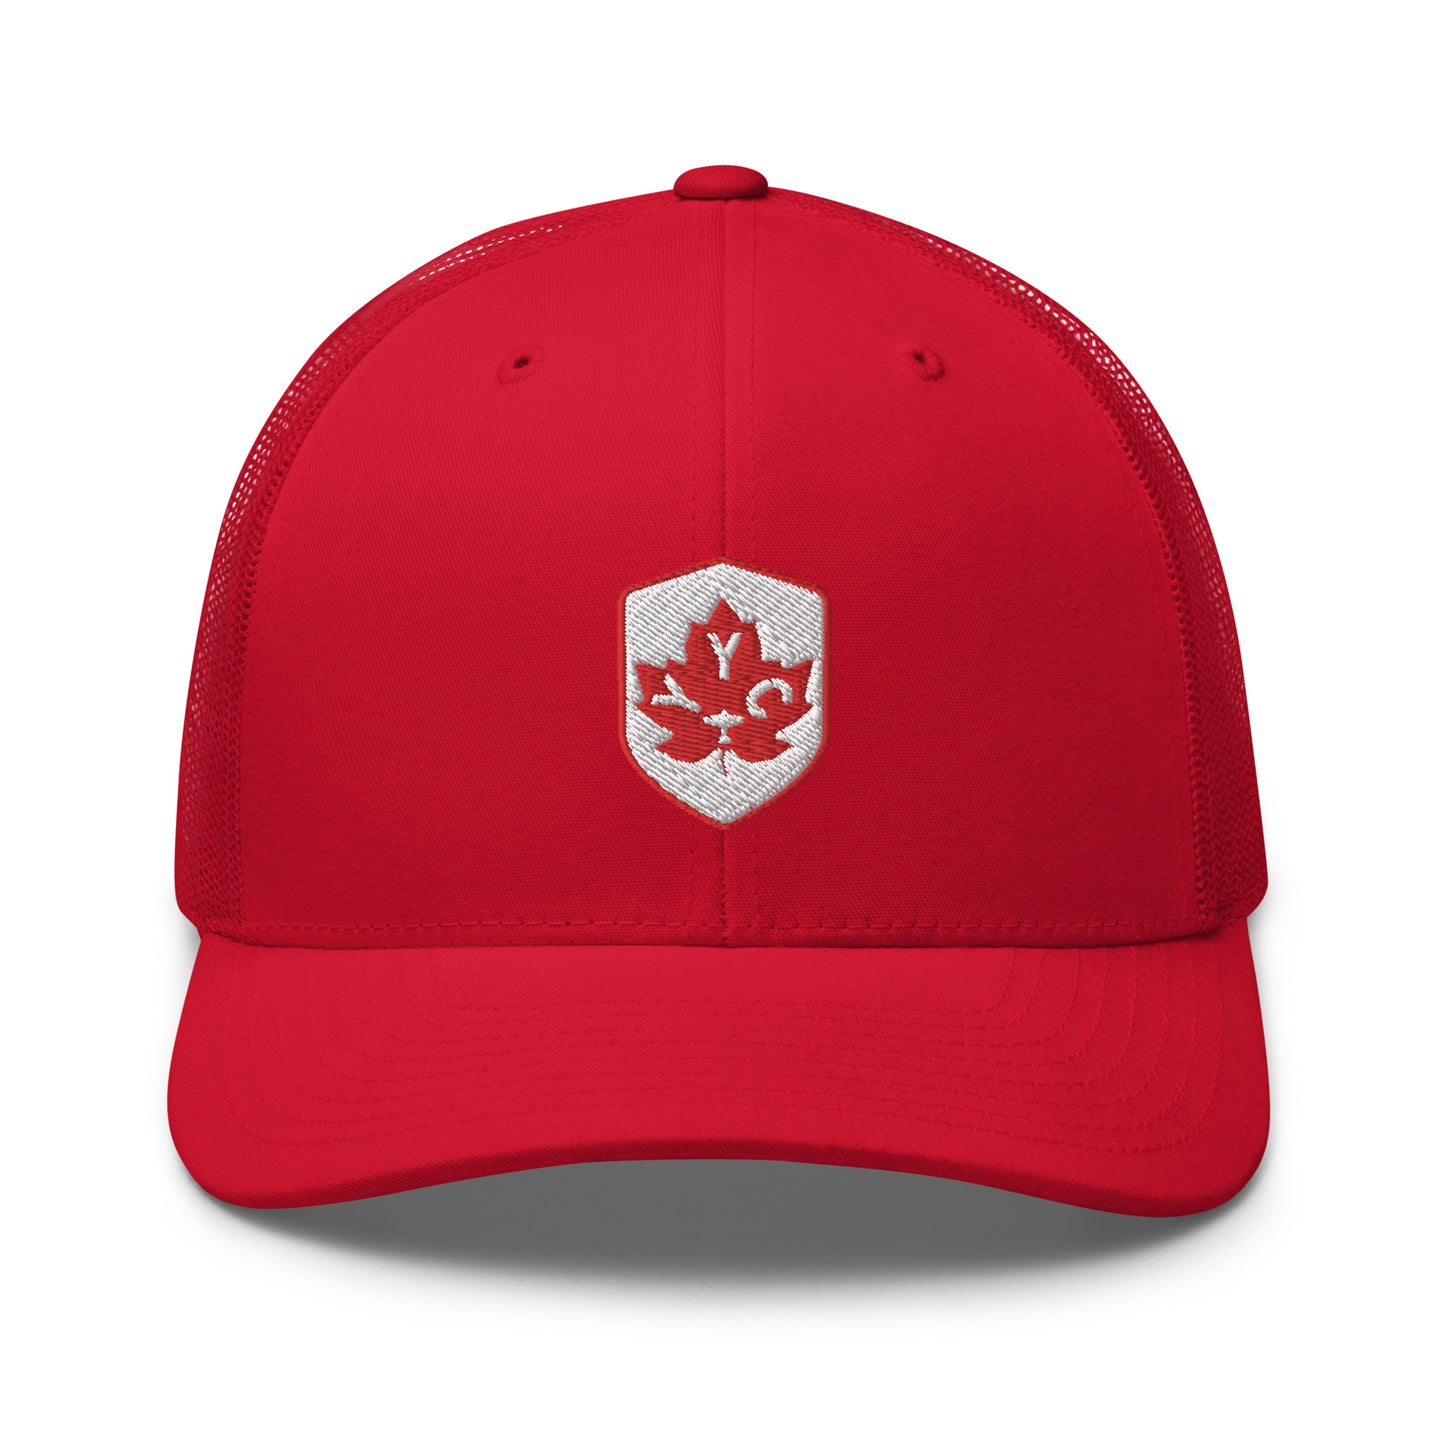 Maple Leaf Trucker Hat - Red/White • YYC Calgary • YHM Designs - Image 23